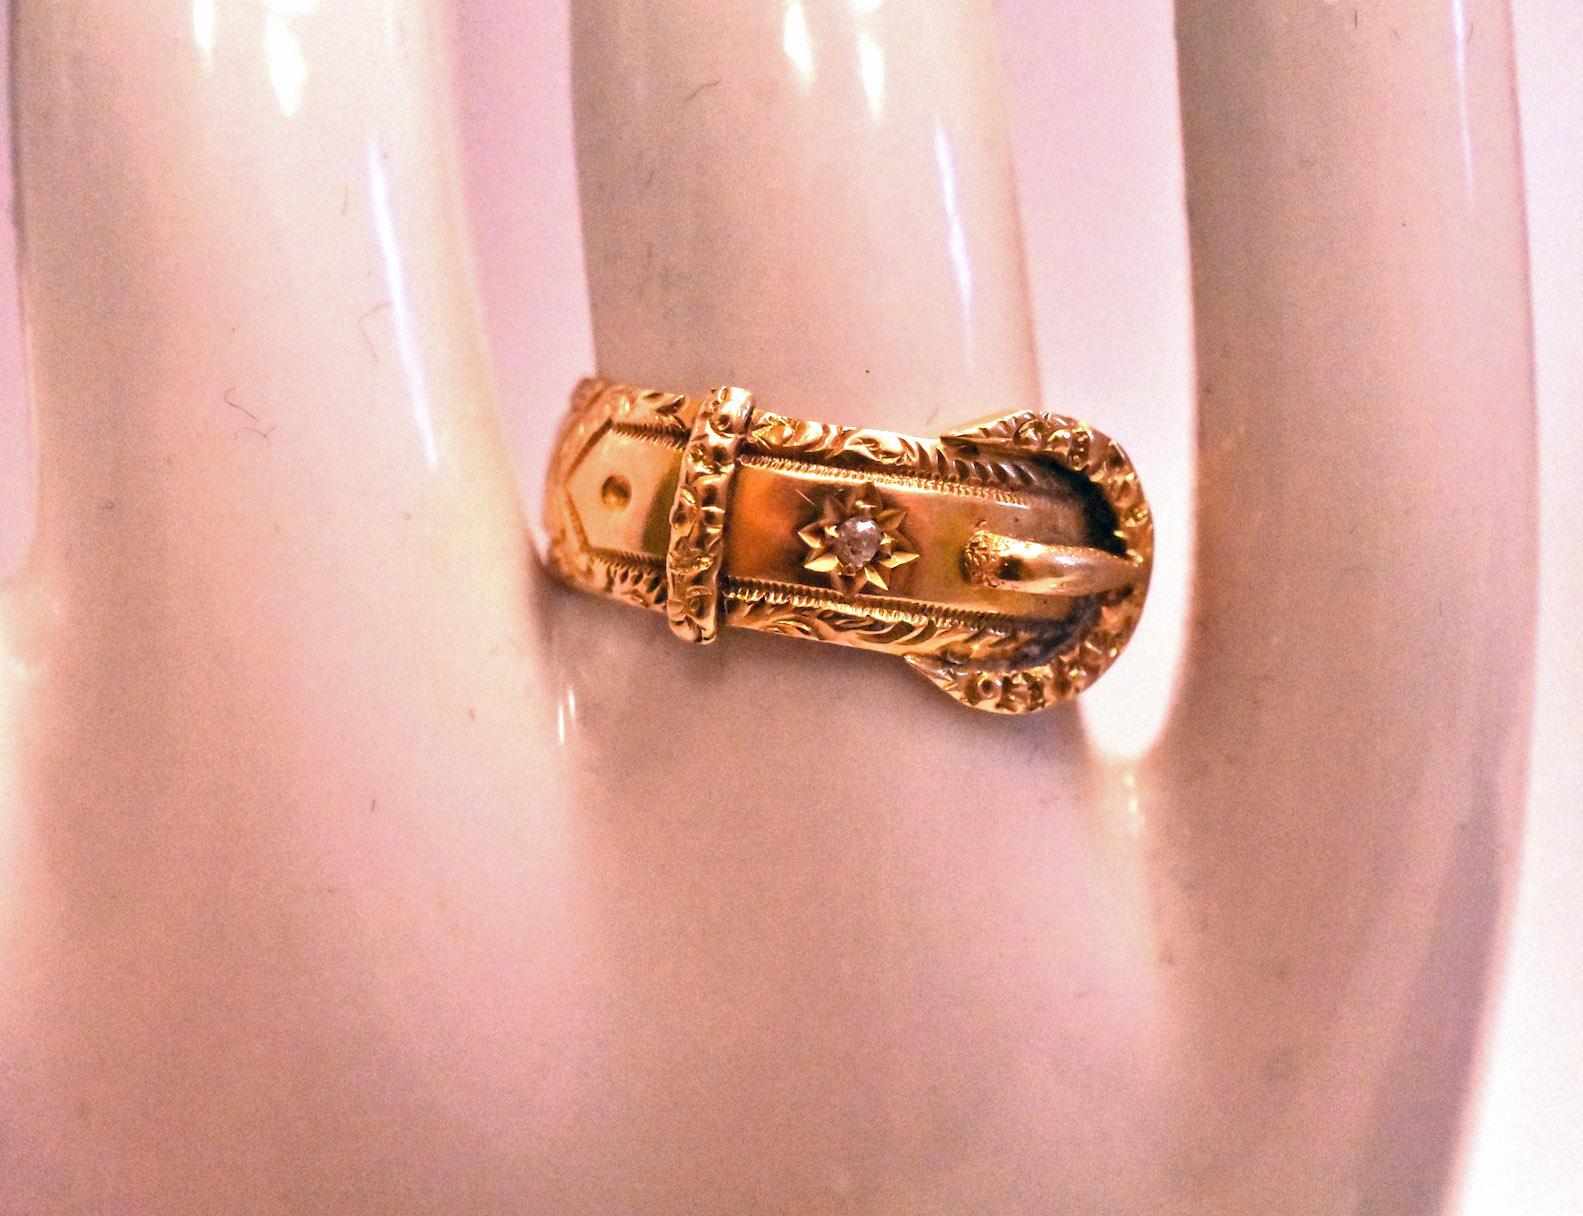 Gold Buckle Ring with Diamonds and Repousse Border HM 1899 3